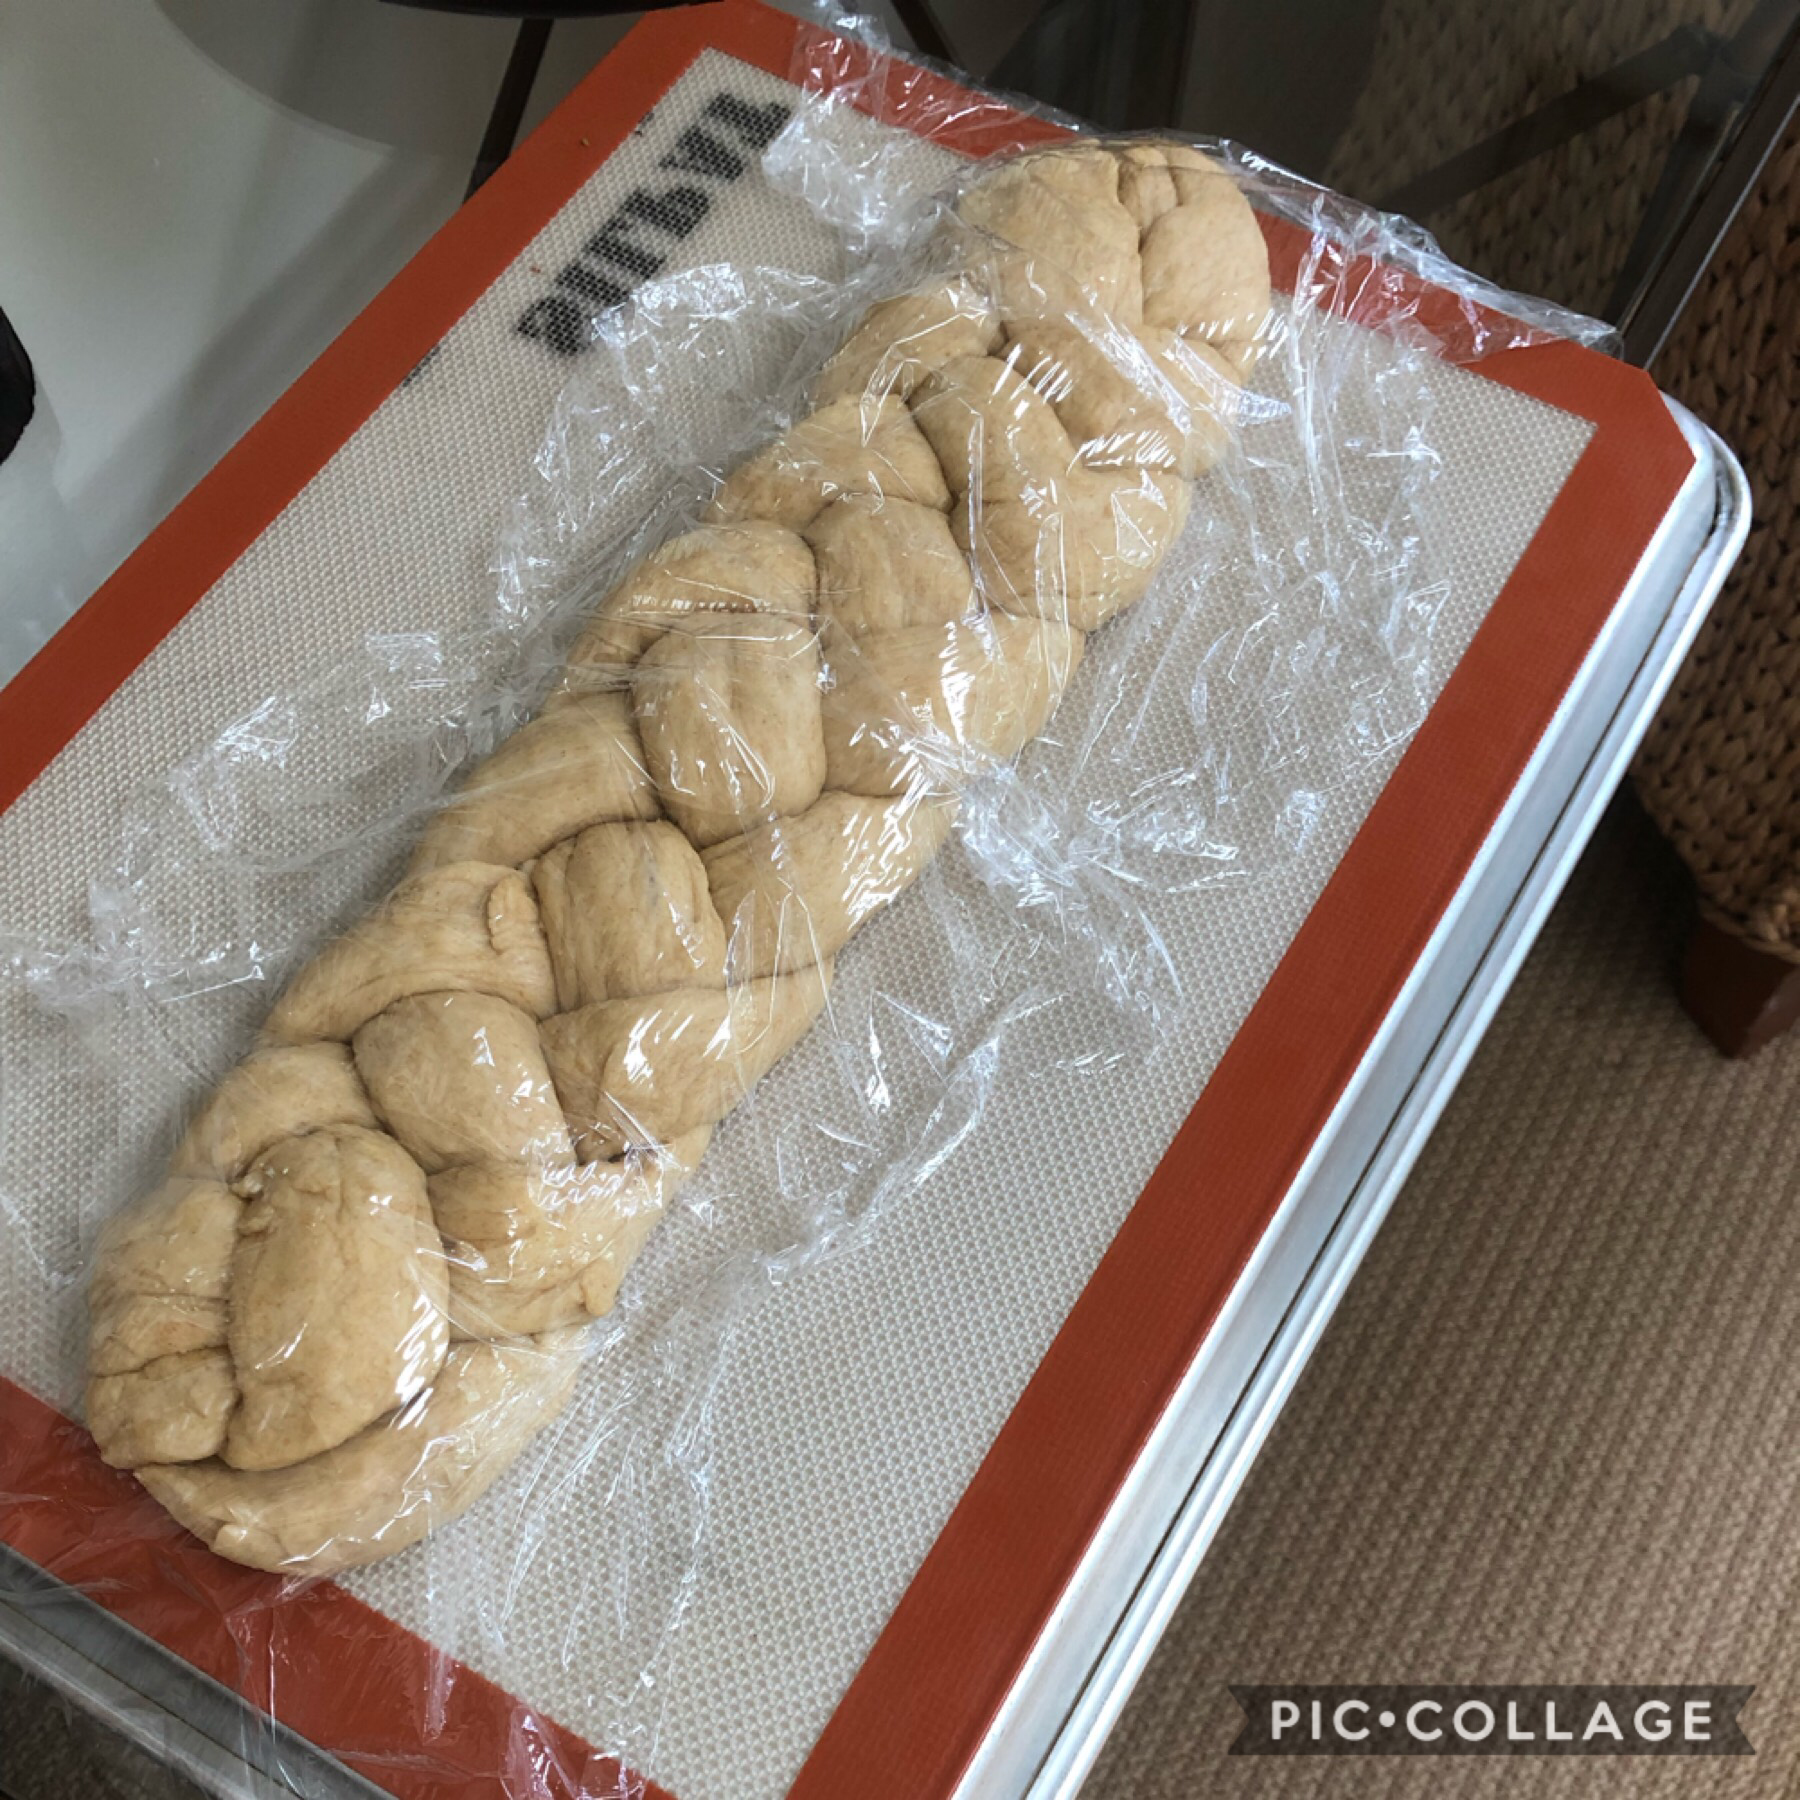 i’m making bread do you guys want some
anyway it’s been a while since i’ve posted and my sister got back from her trip!! which is cool but i have been feeling inexplicably sad lately so hopefully this bread can make me happy